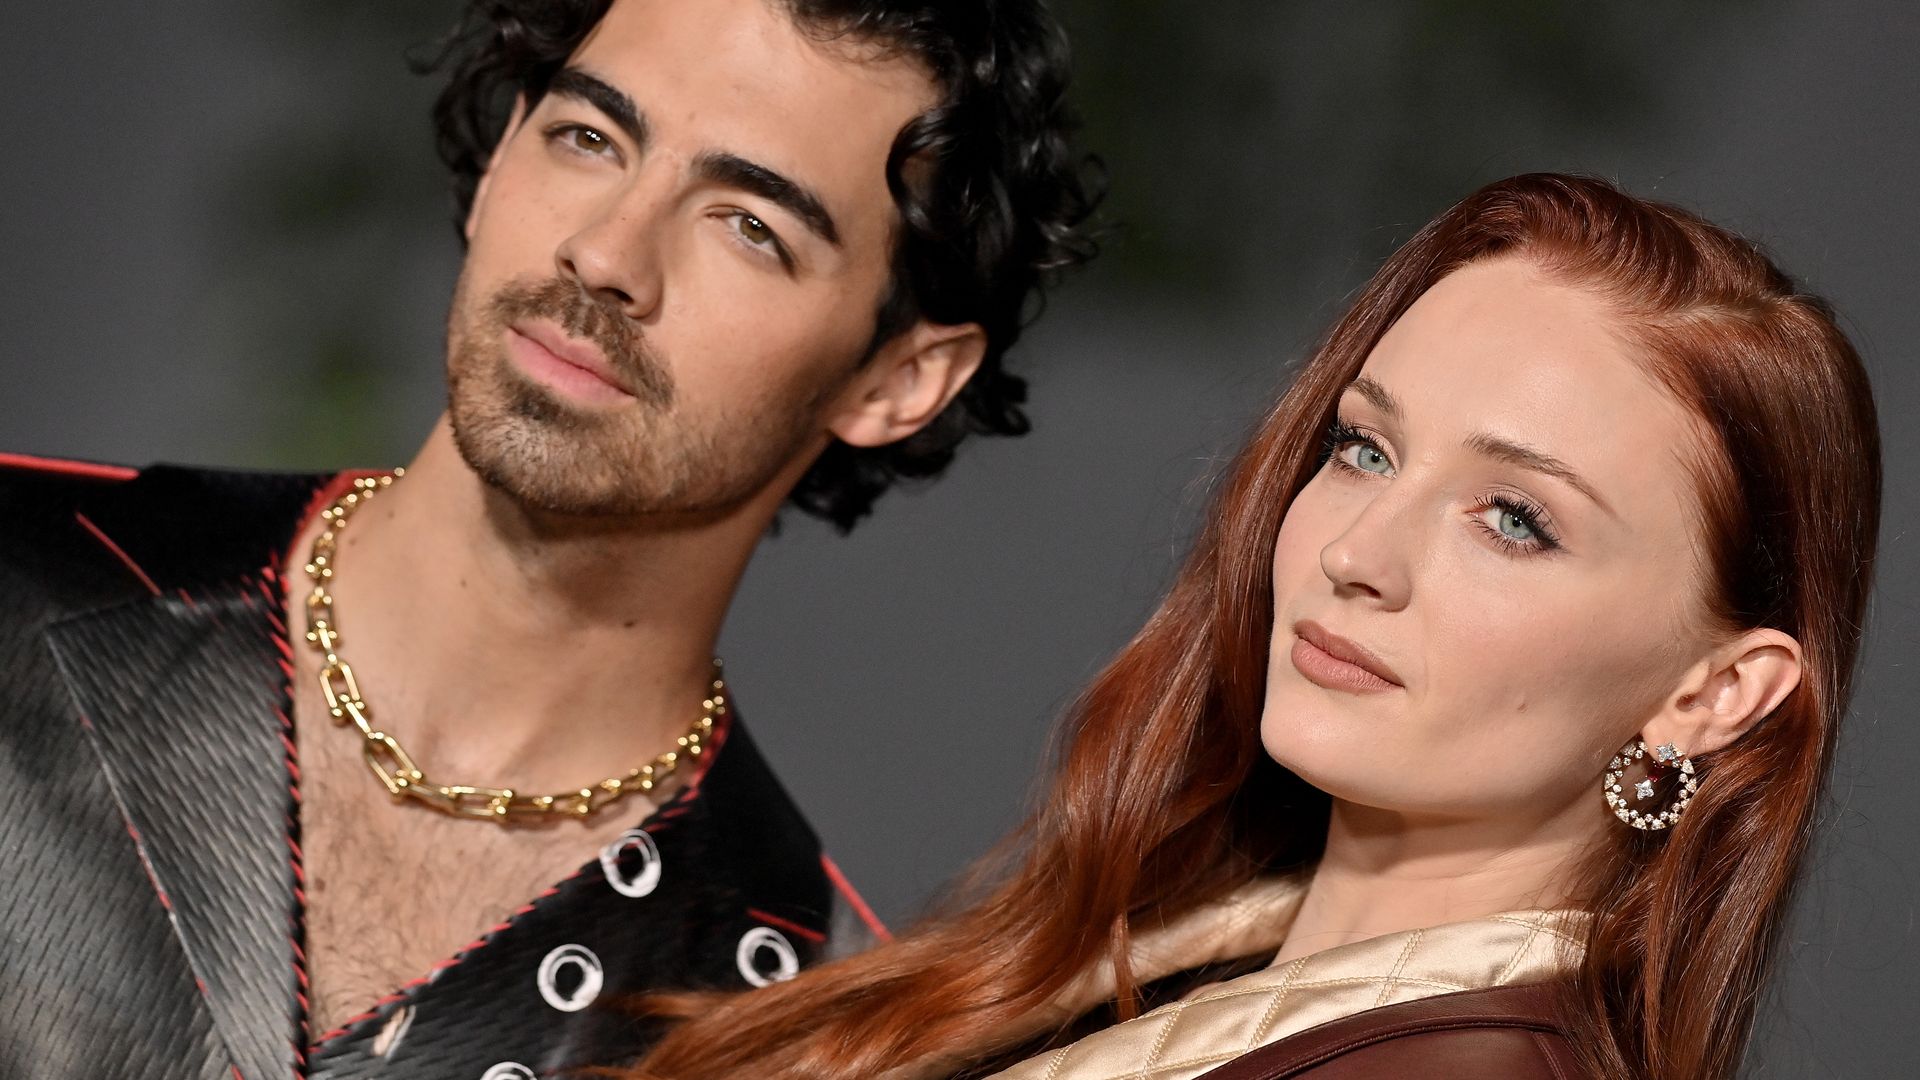 LOS ANGELES, CALIFORNIA - OCTOBER 15: Joe Jonas and Sophie Turner attend the 2nd Annual Academy Museum Gala at Academy Museum of Motion Pictures on October 15, 2022 in Los Angeles, California. (Photo by Axelle/Bauer-Griffin/FilmMagic)